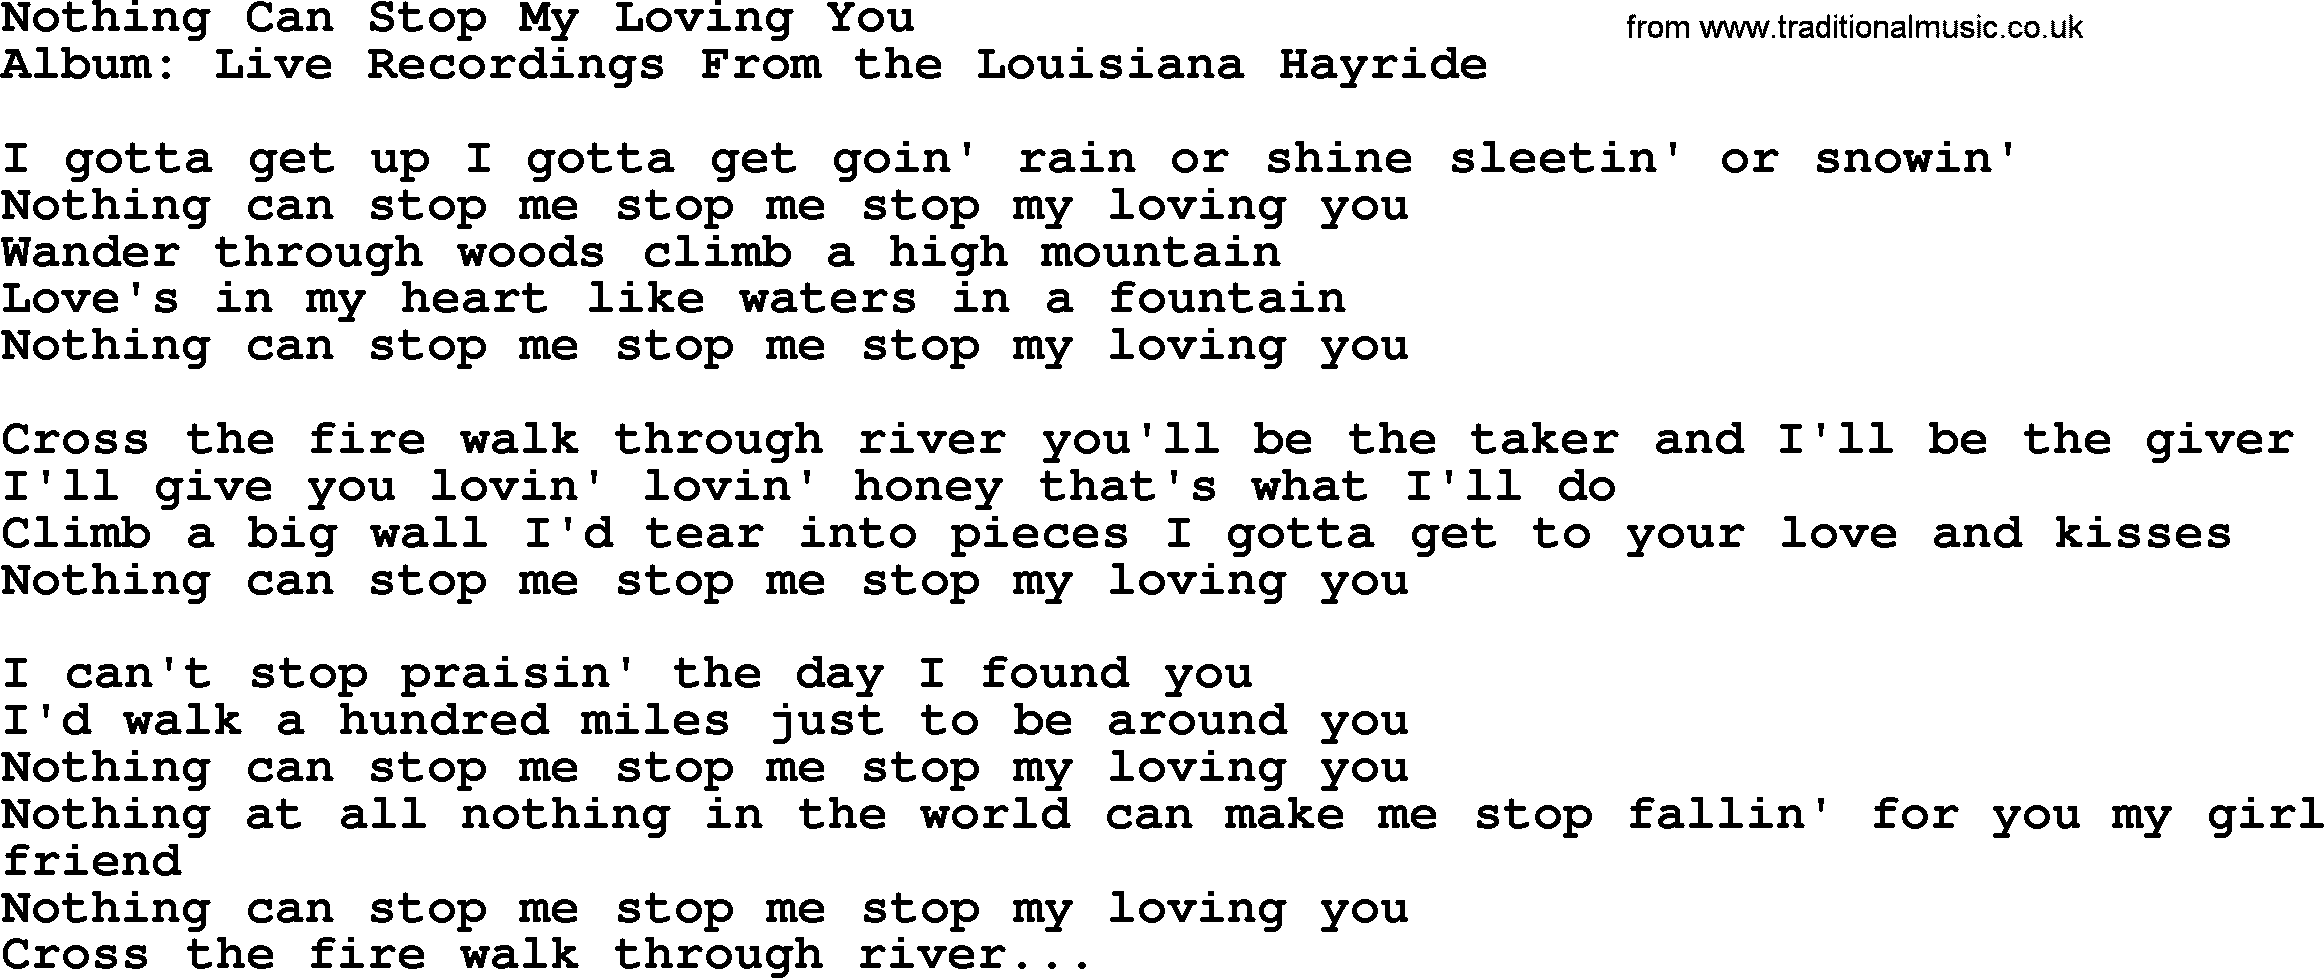 George Jones song: Nothing Can Stop My Loving You, lyrics